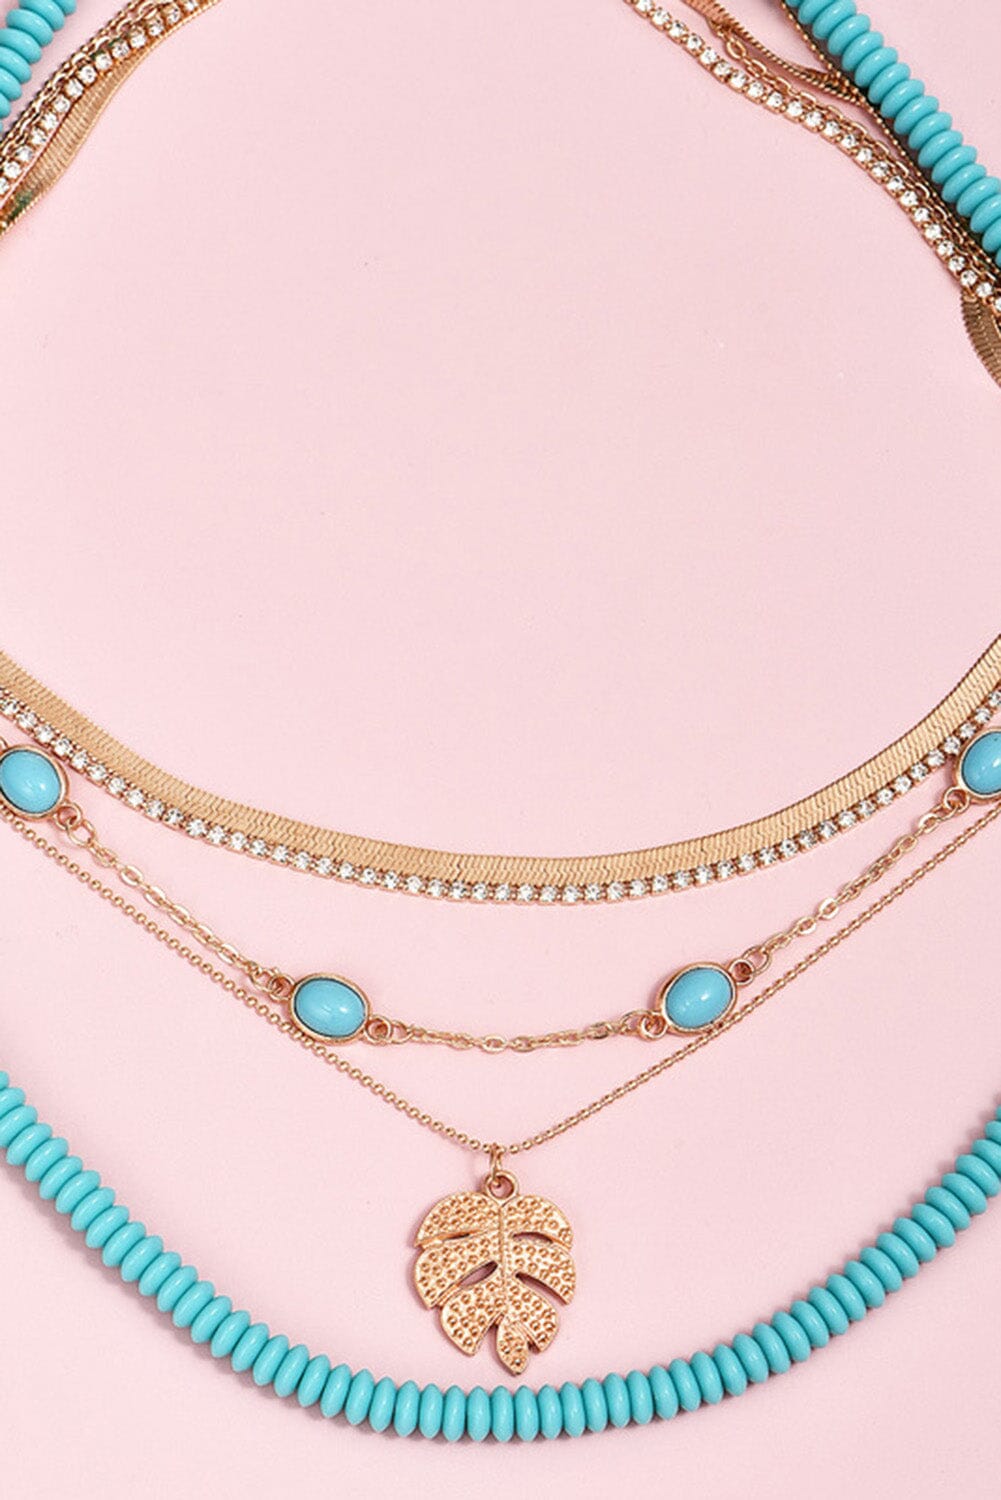 Turquoise & Leaf Layered Necklace Jewelry Lover 